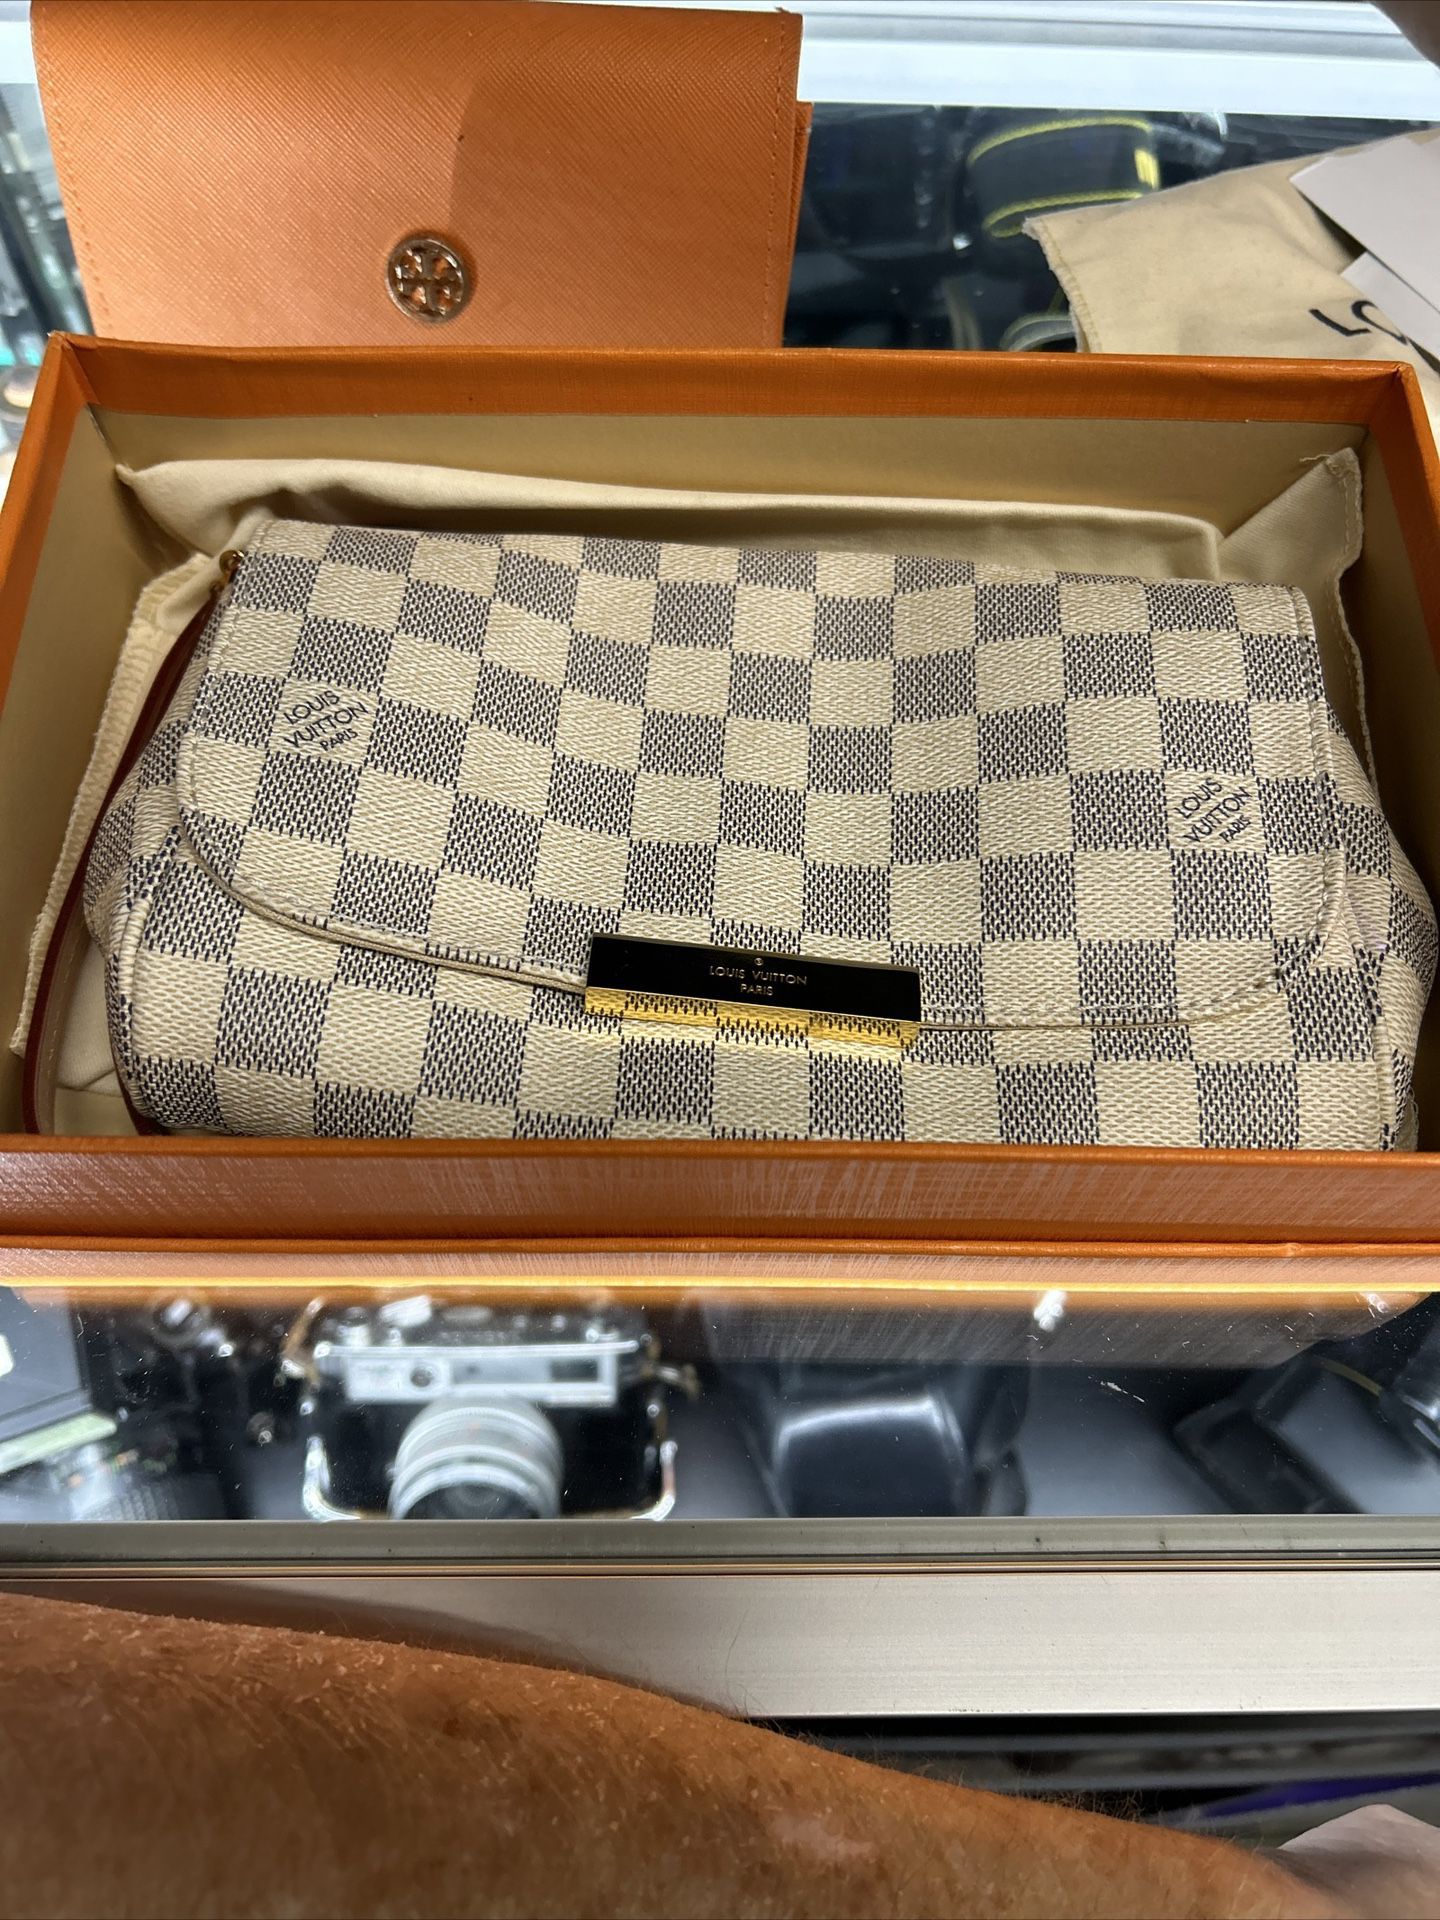 LOUIS VUITTON Damier Azur Favorite PM Perfect Condition With Everything !!! Read !!